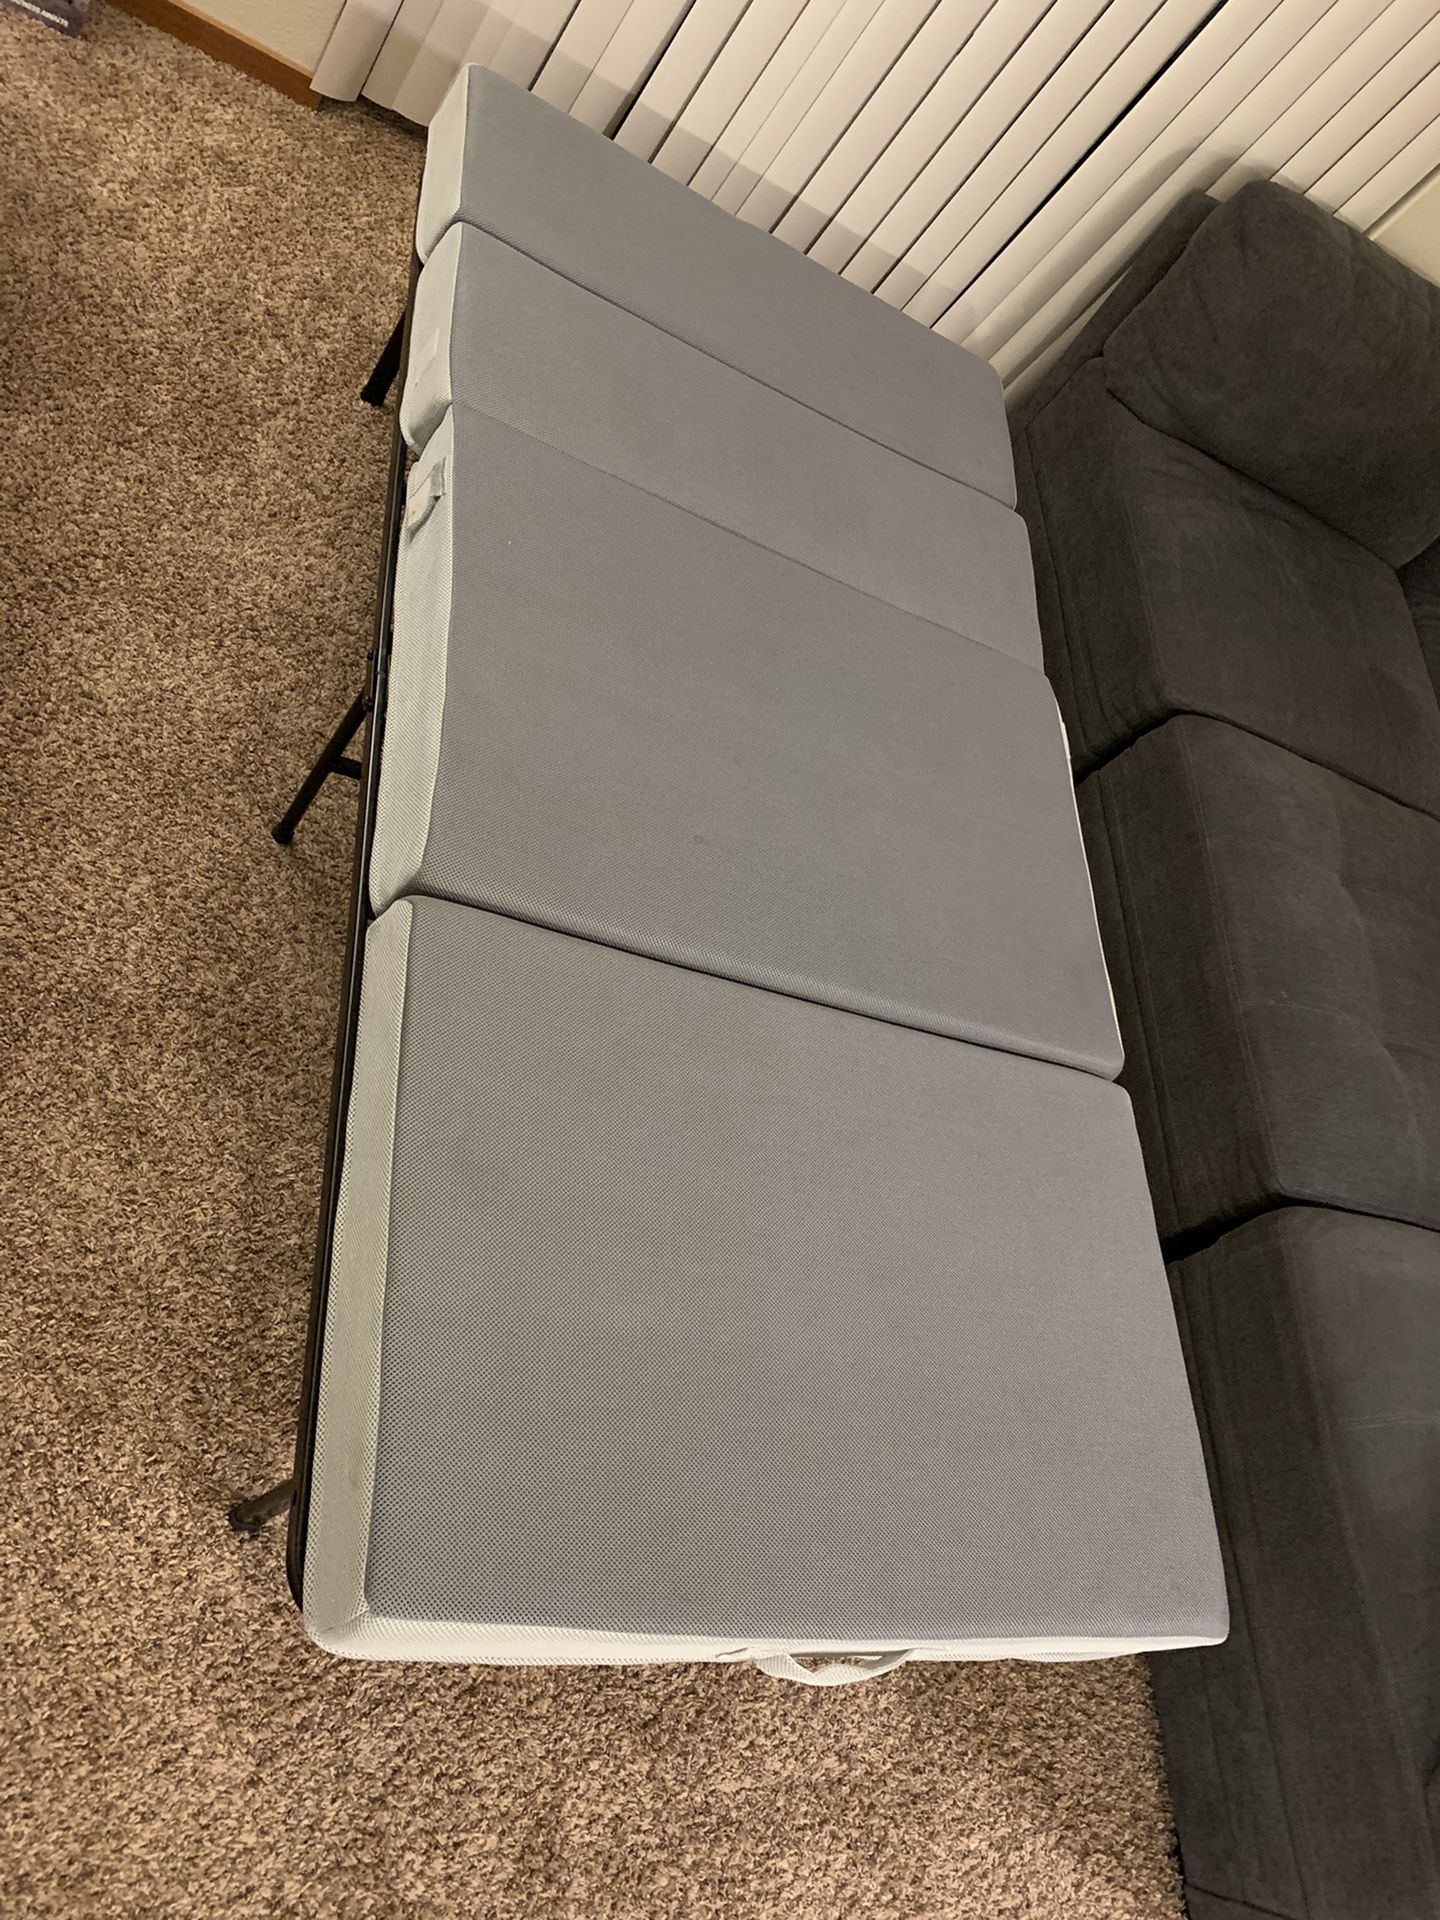 Foldable mattress and bed frame